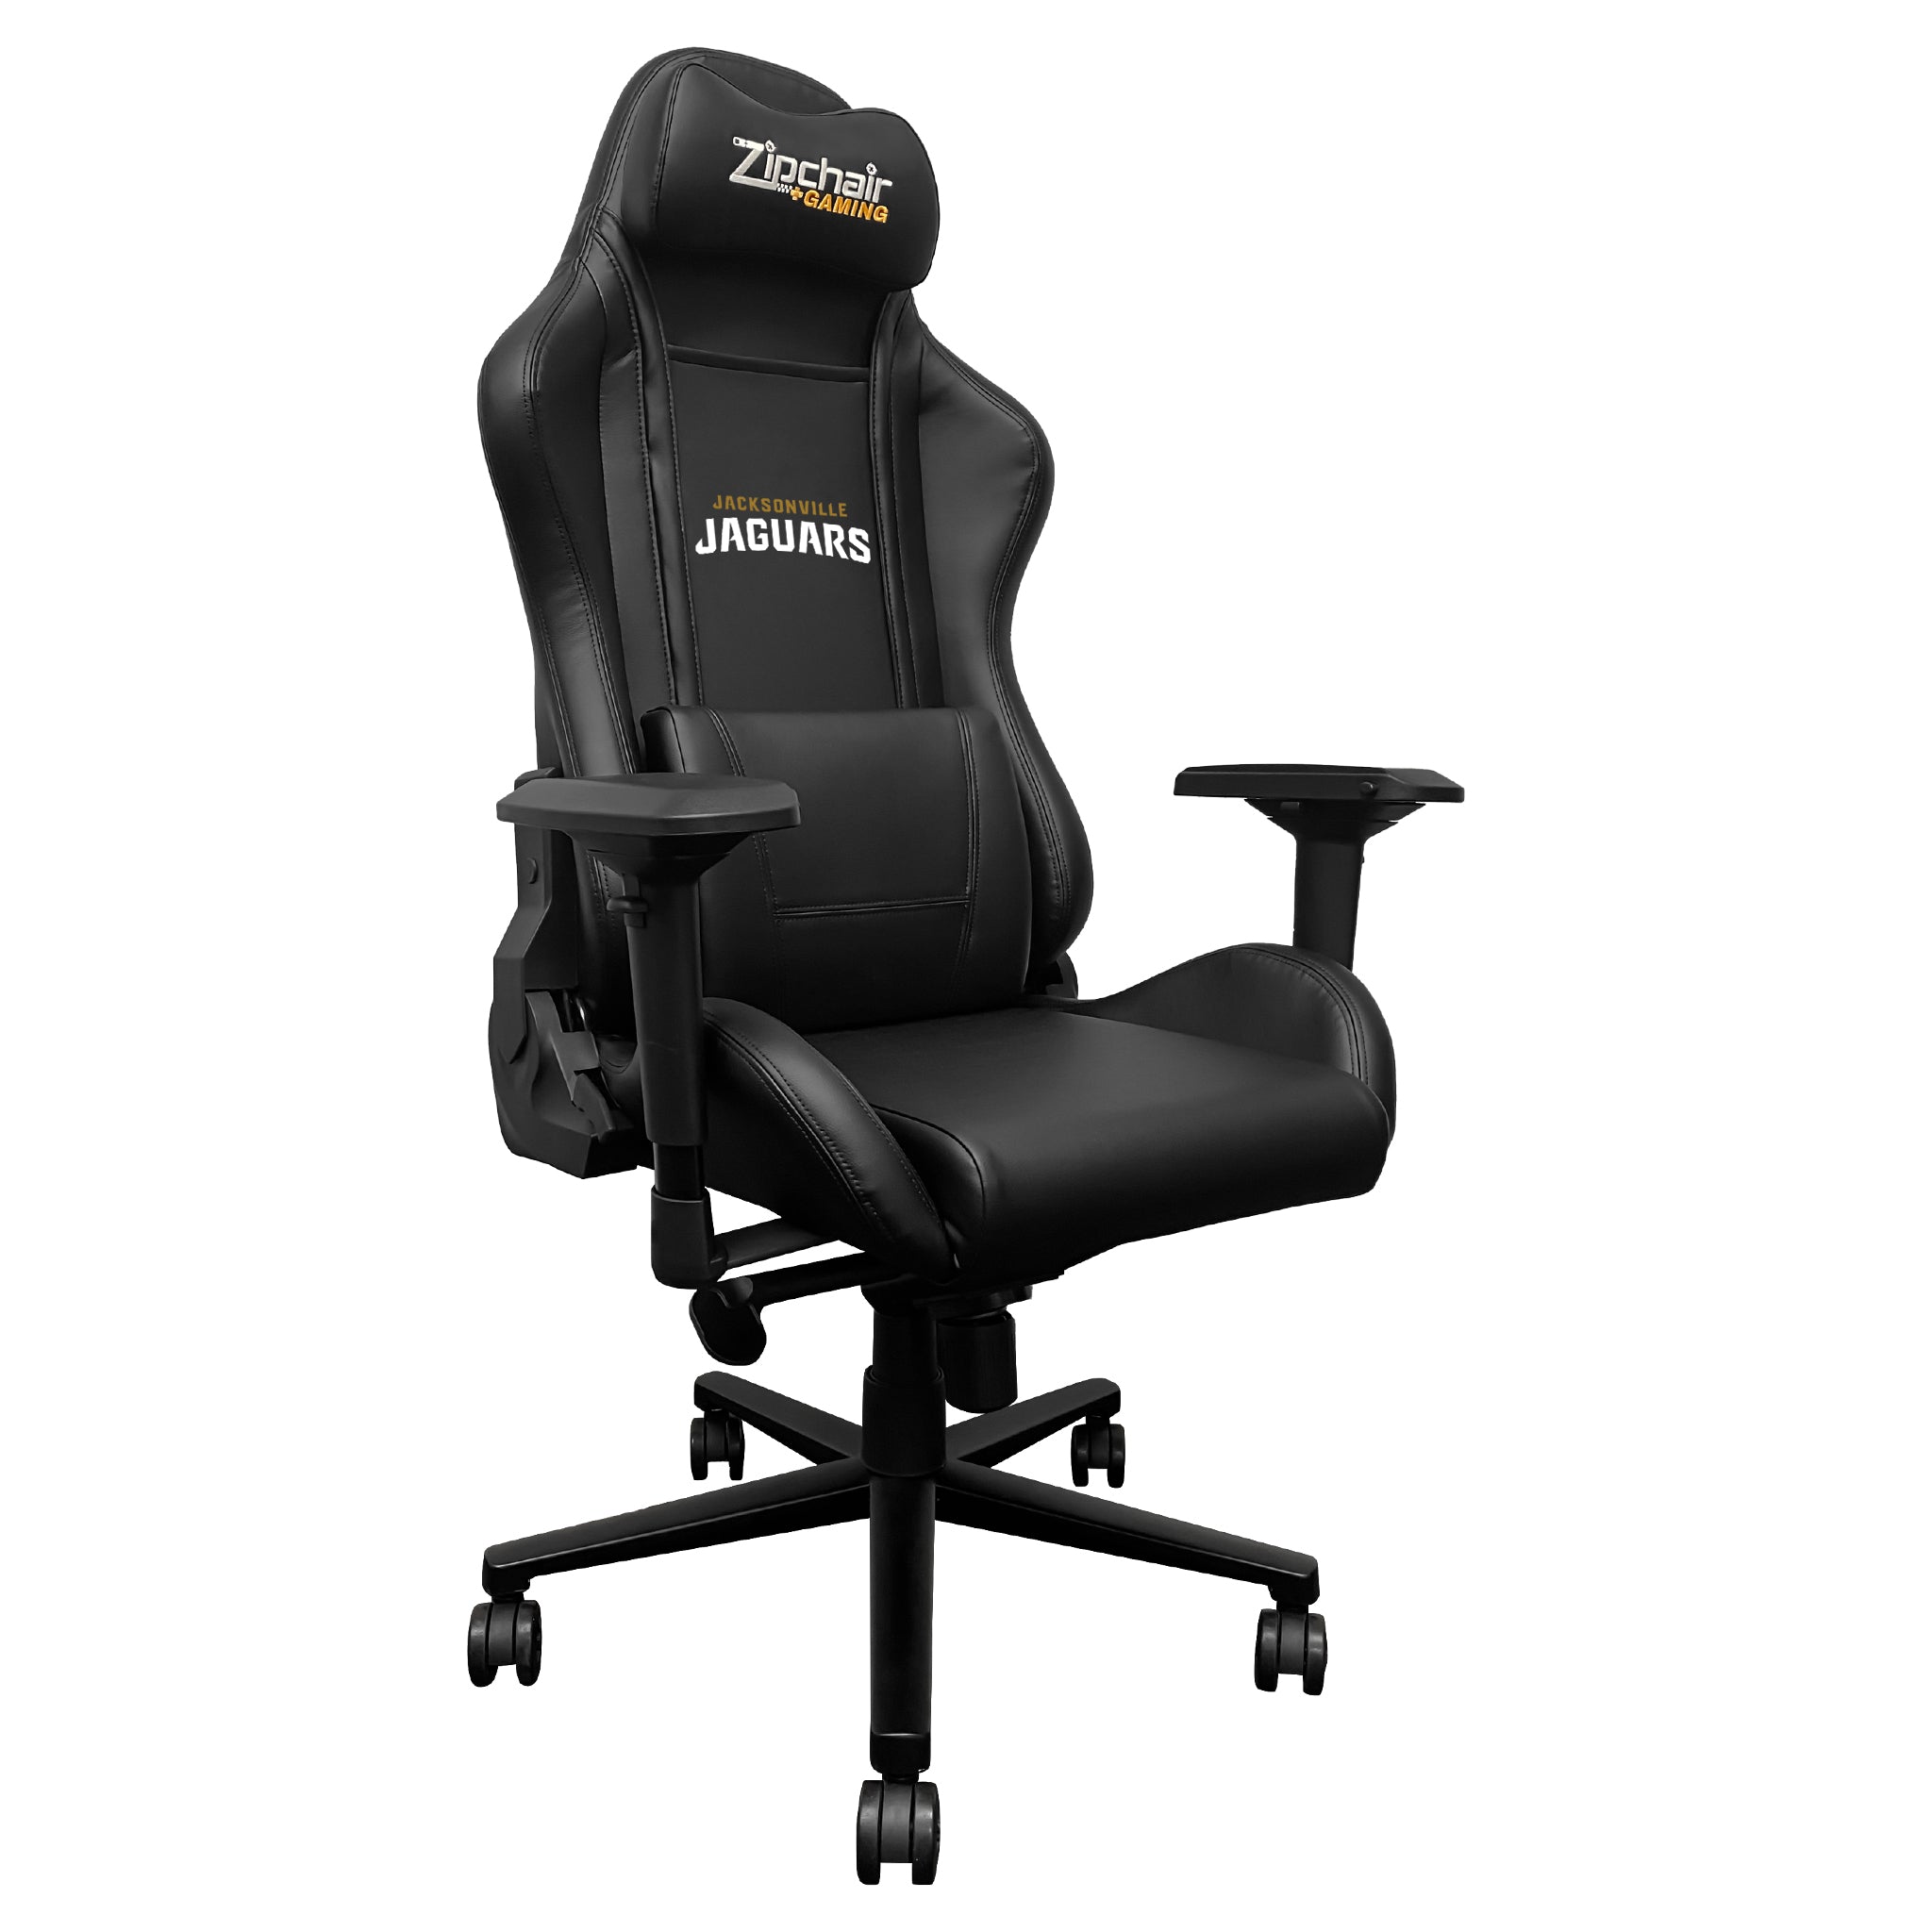 Jacksonville Jaguars Xpression Gaming Chair